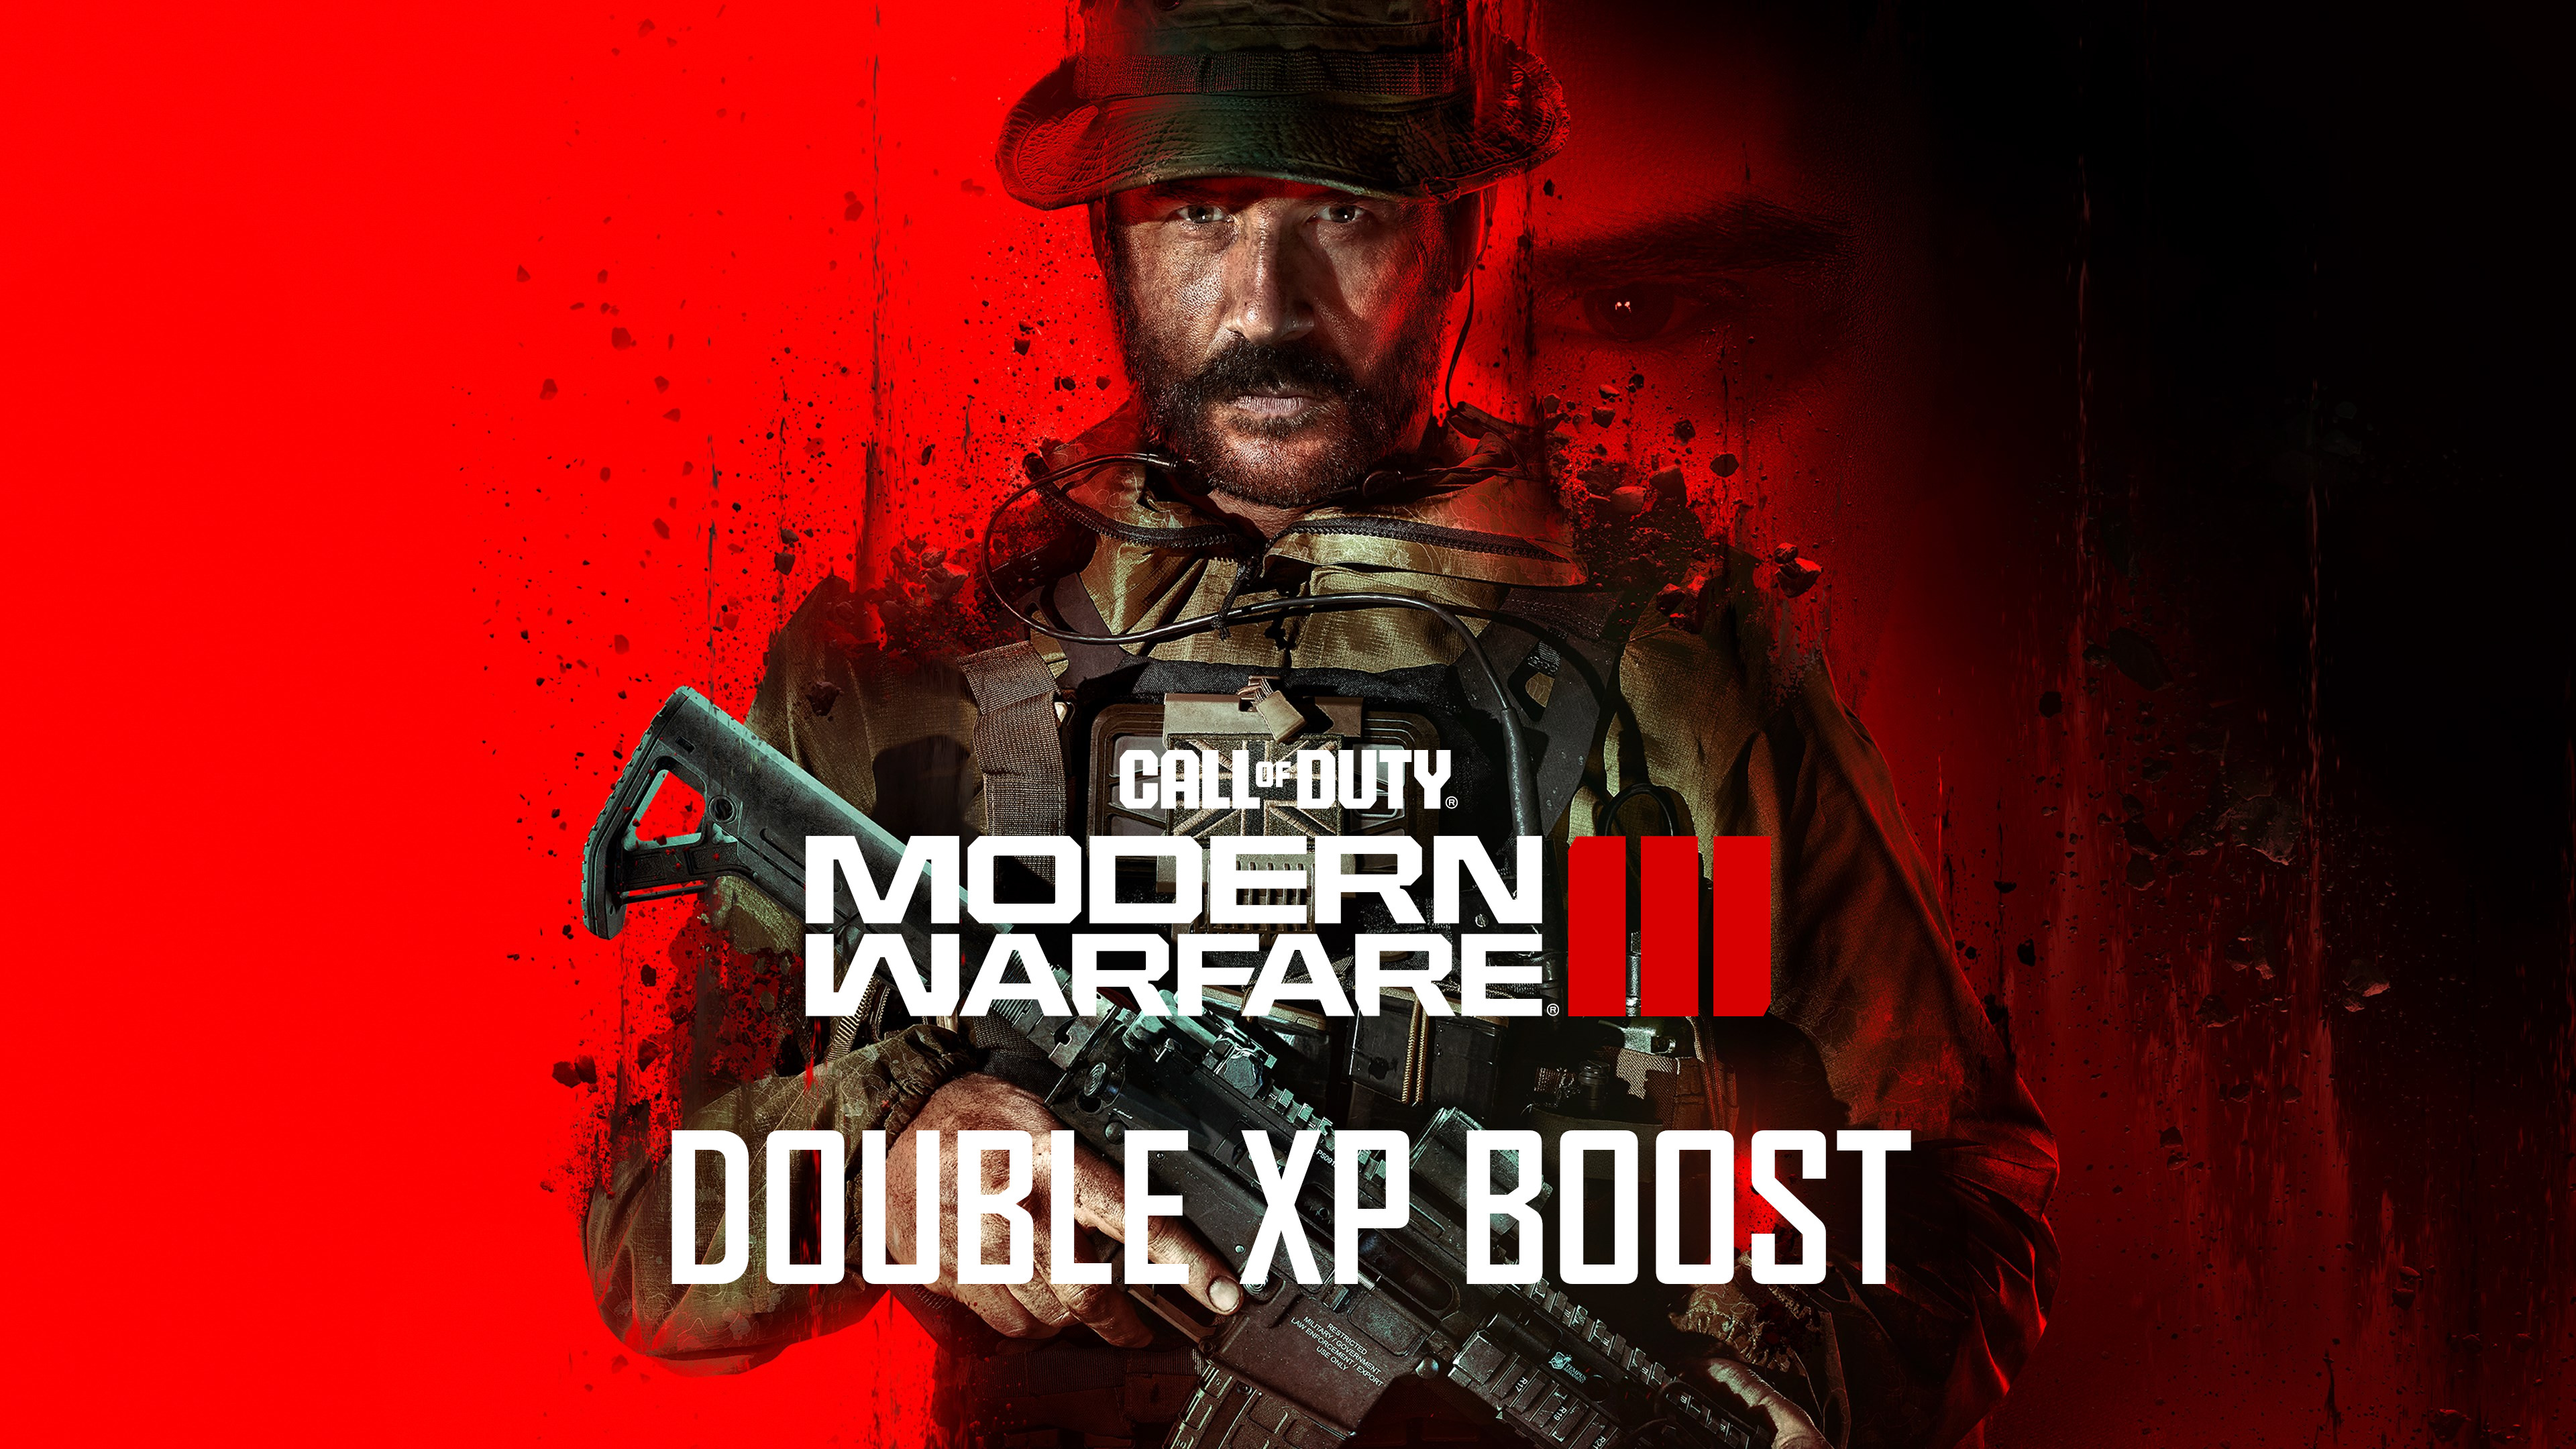 Call Of Duty: Modern Warfare III / Warzone 2 - 10 Hours Double XP Boost PC/PS4/PS5/XBOX One/Series X,S CD Key